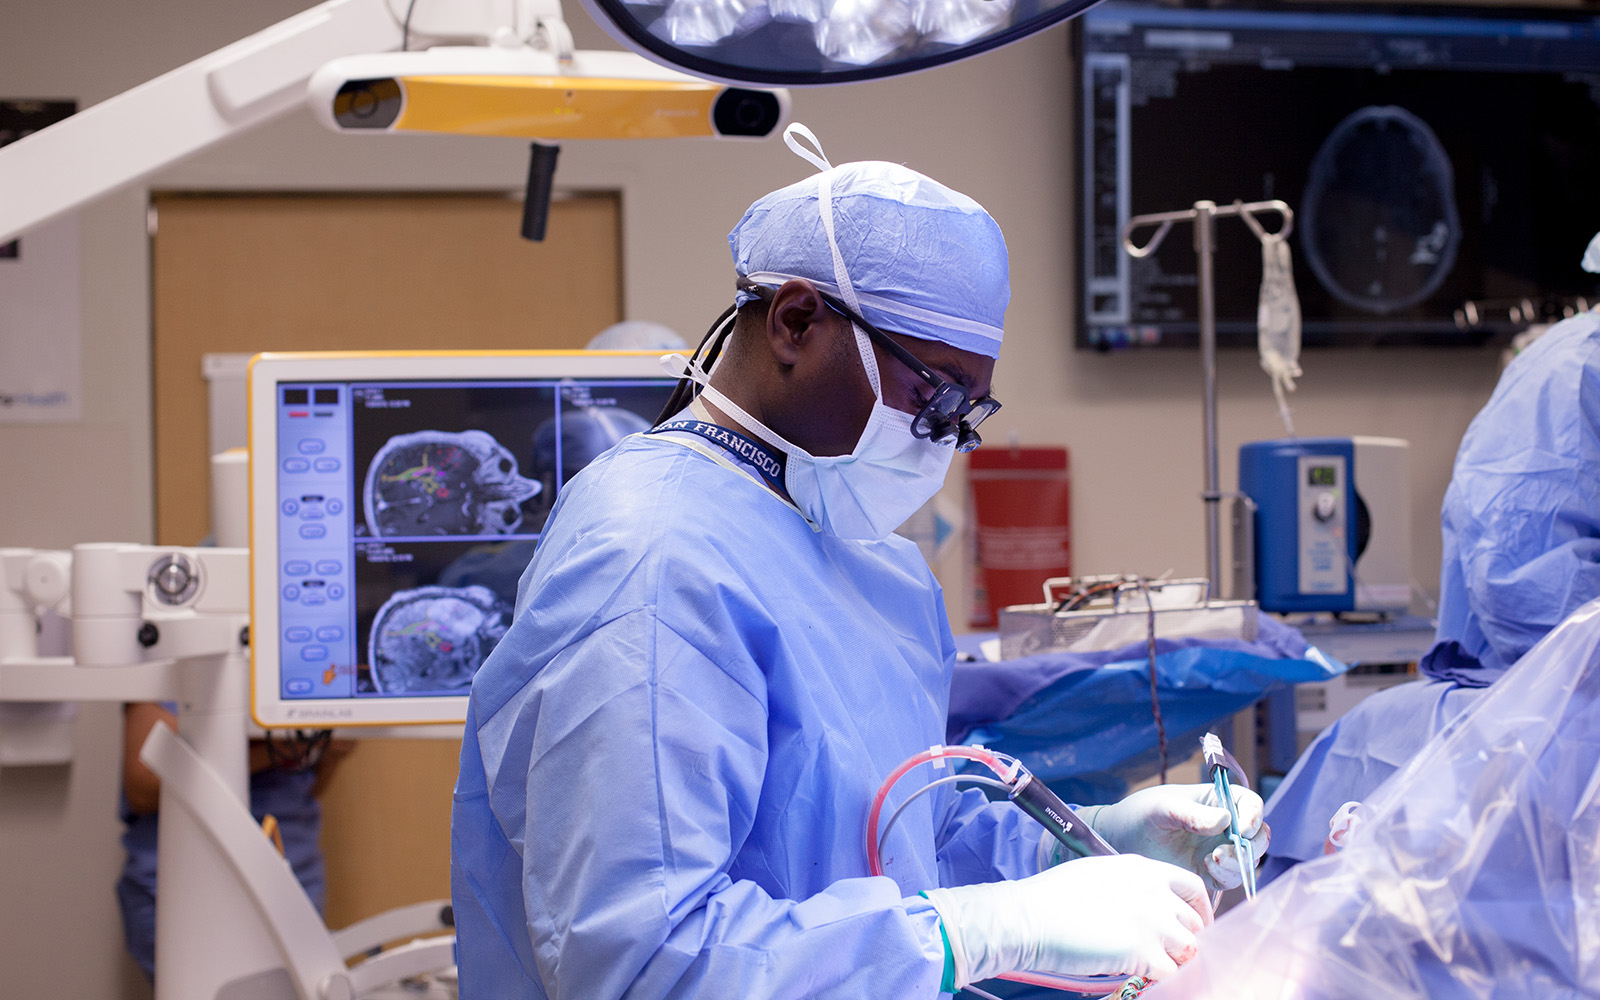 Photo of Dr. Hervey Jumper in the OR